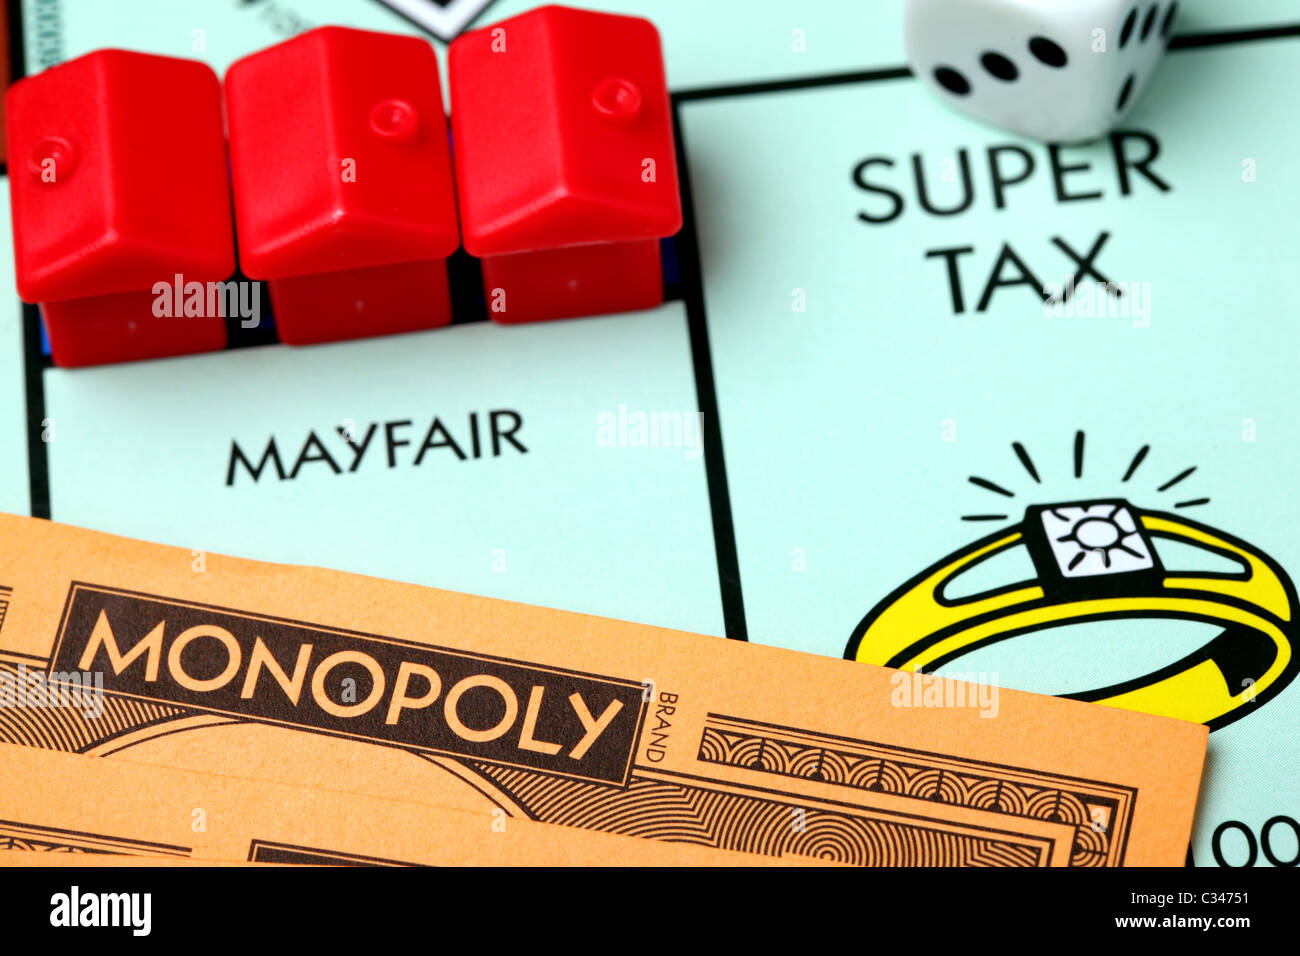 Mayfair and Super Tax on the Monopoly board Stock Photo